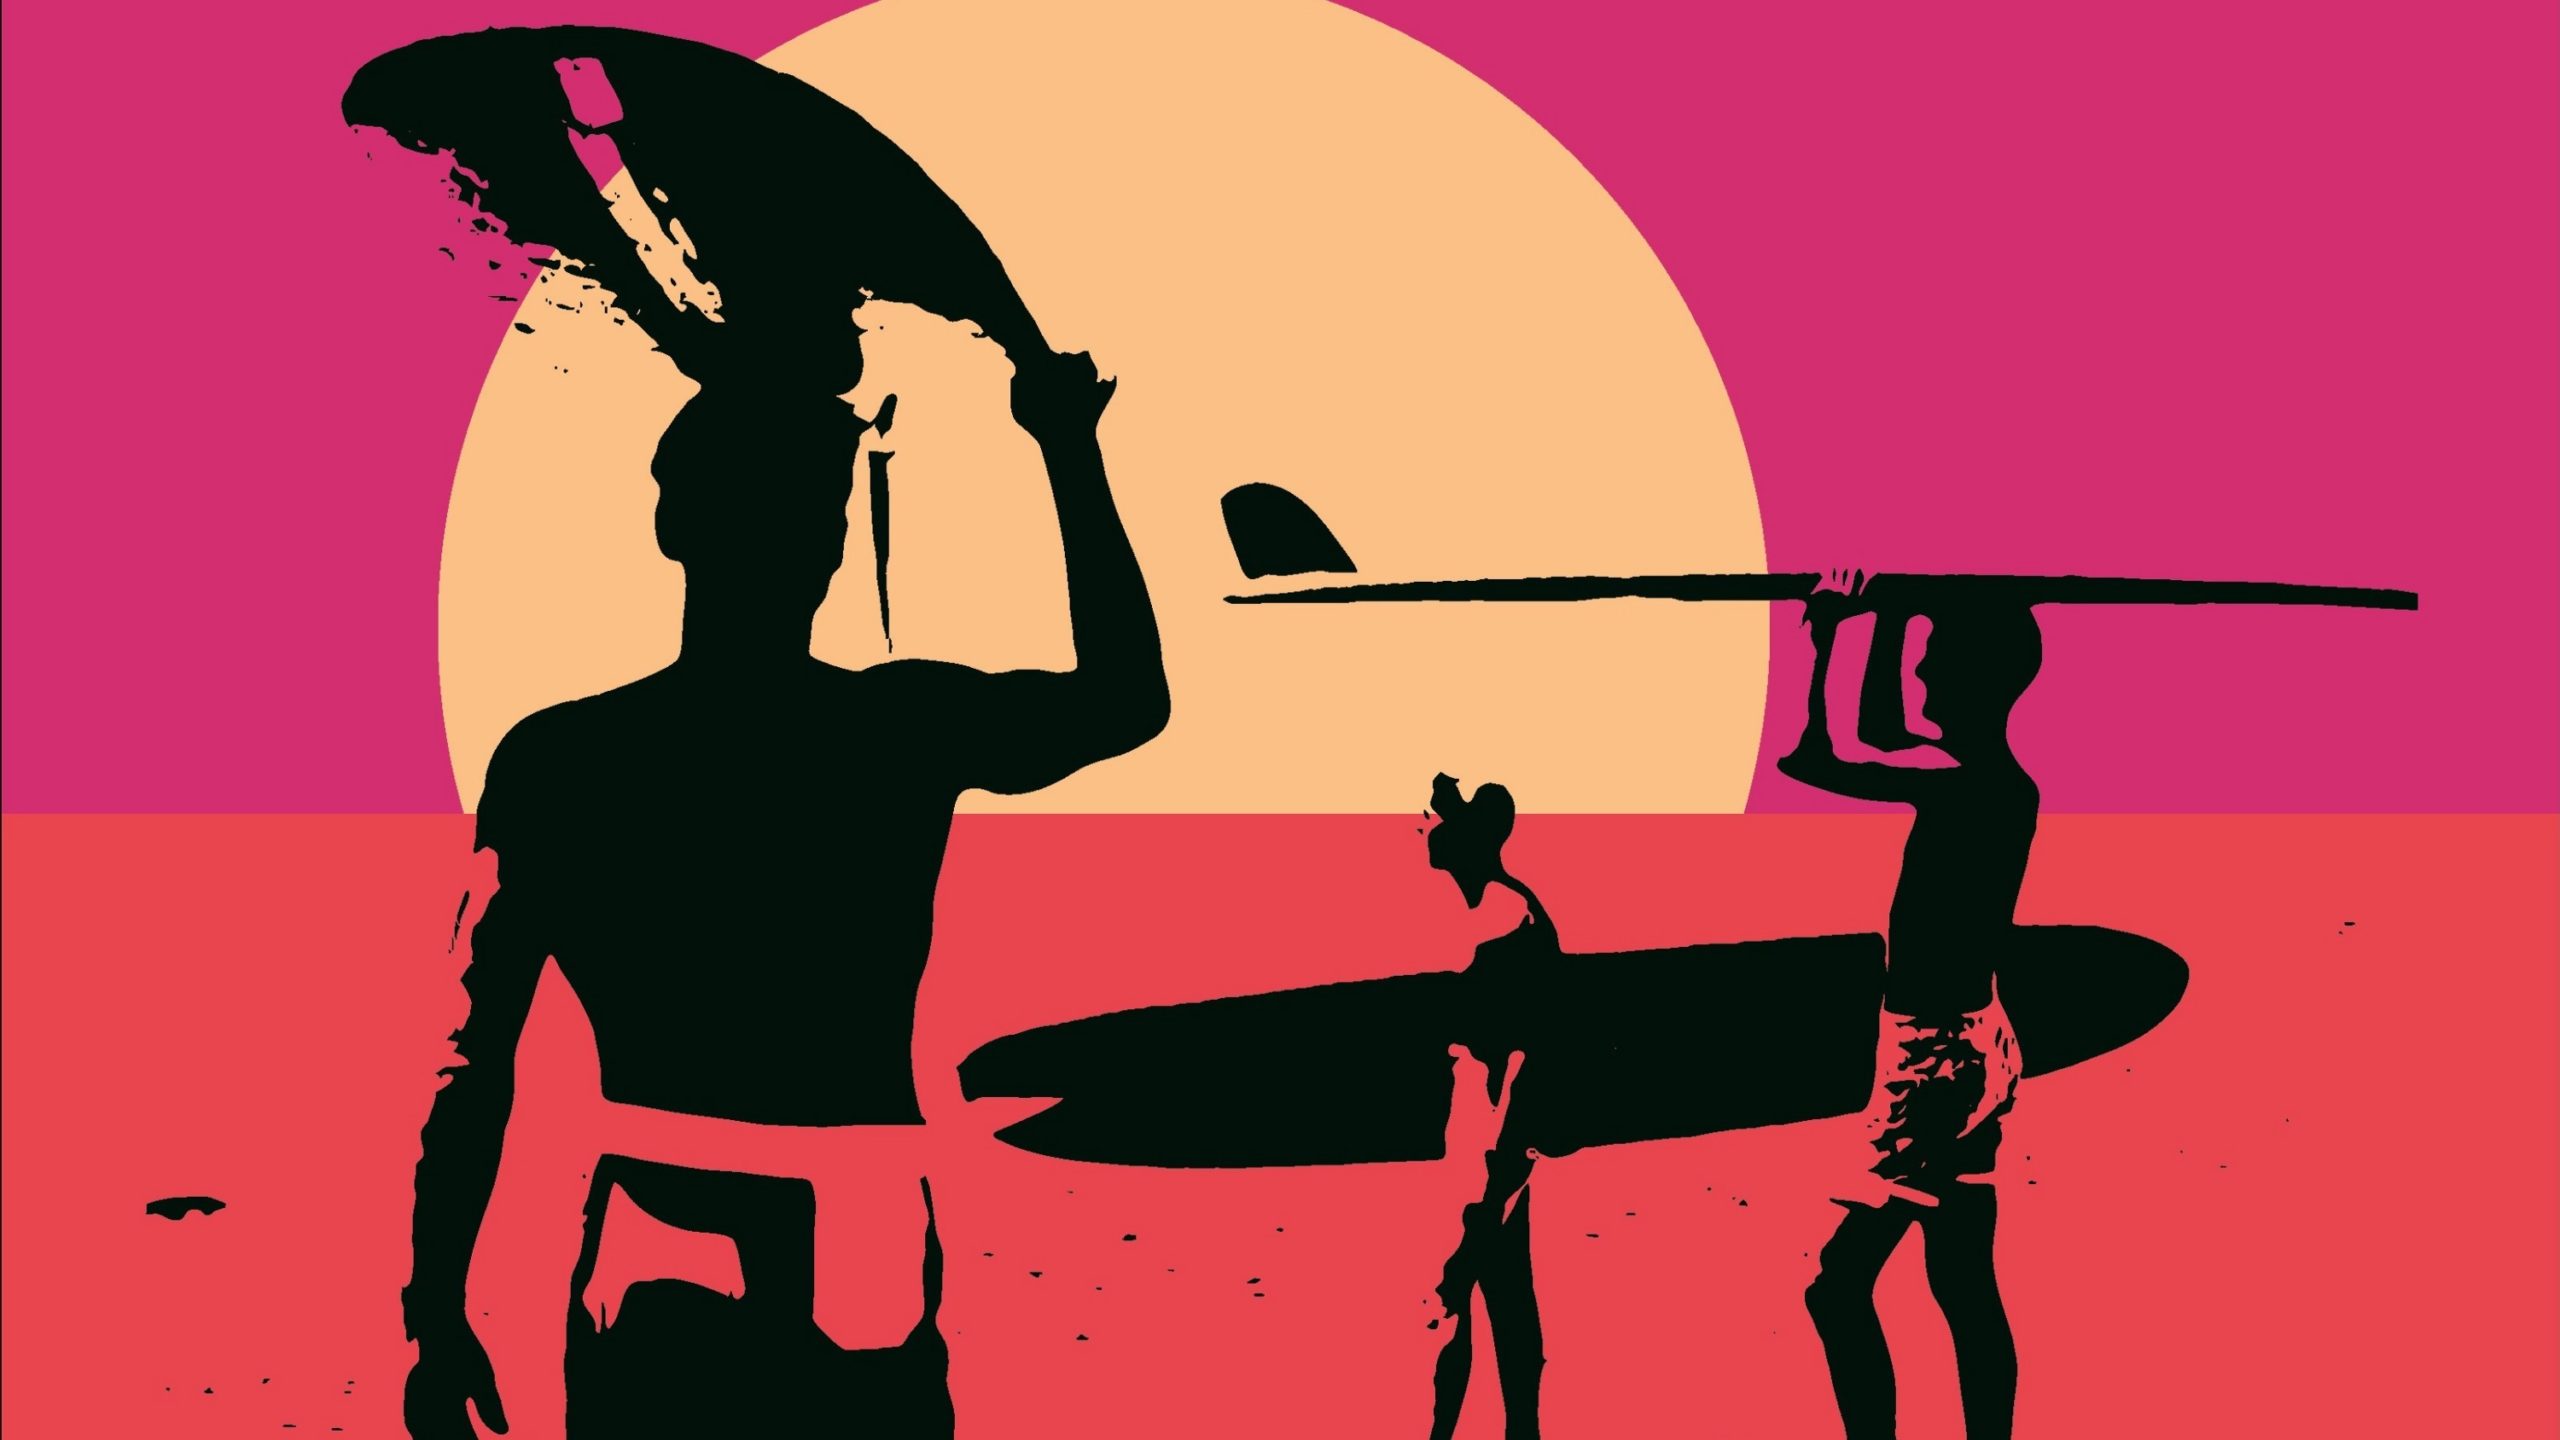 A pop-art style poster depicting three men carrying surfboards.